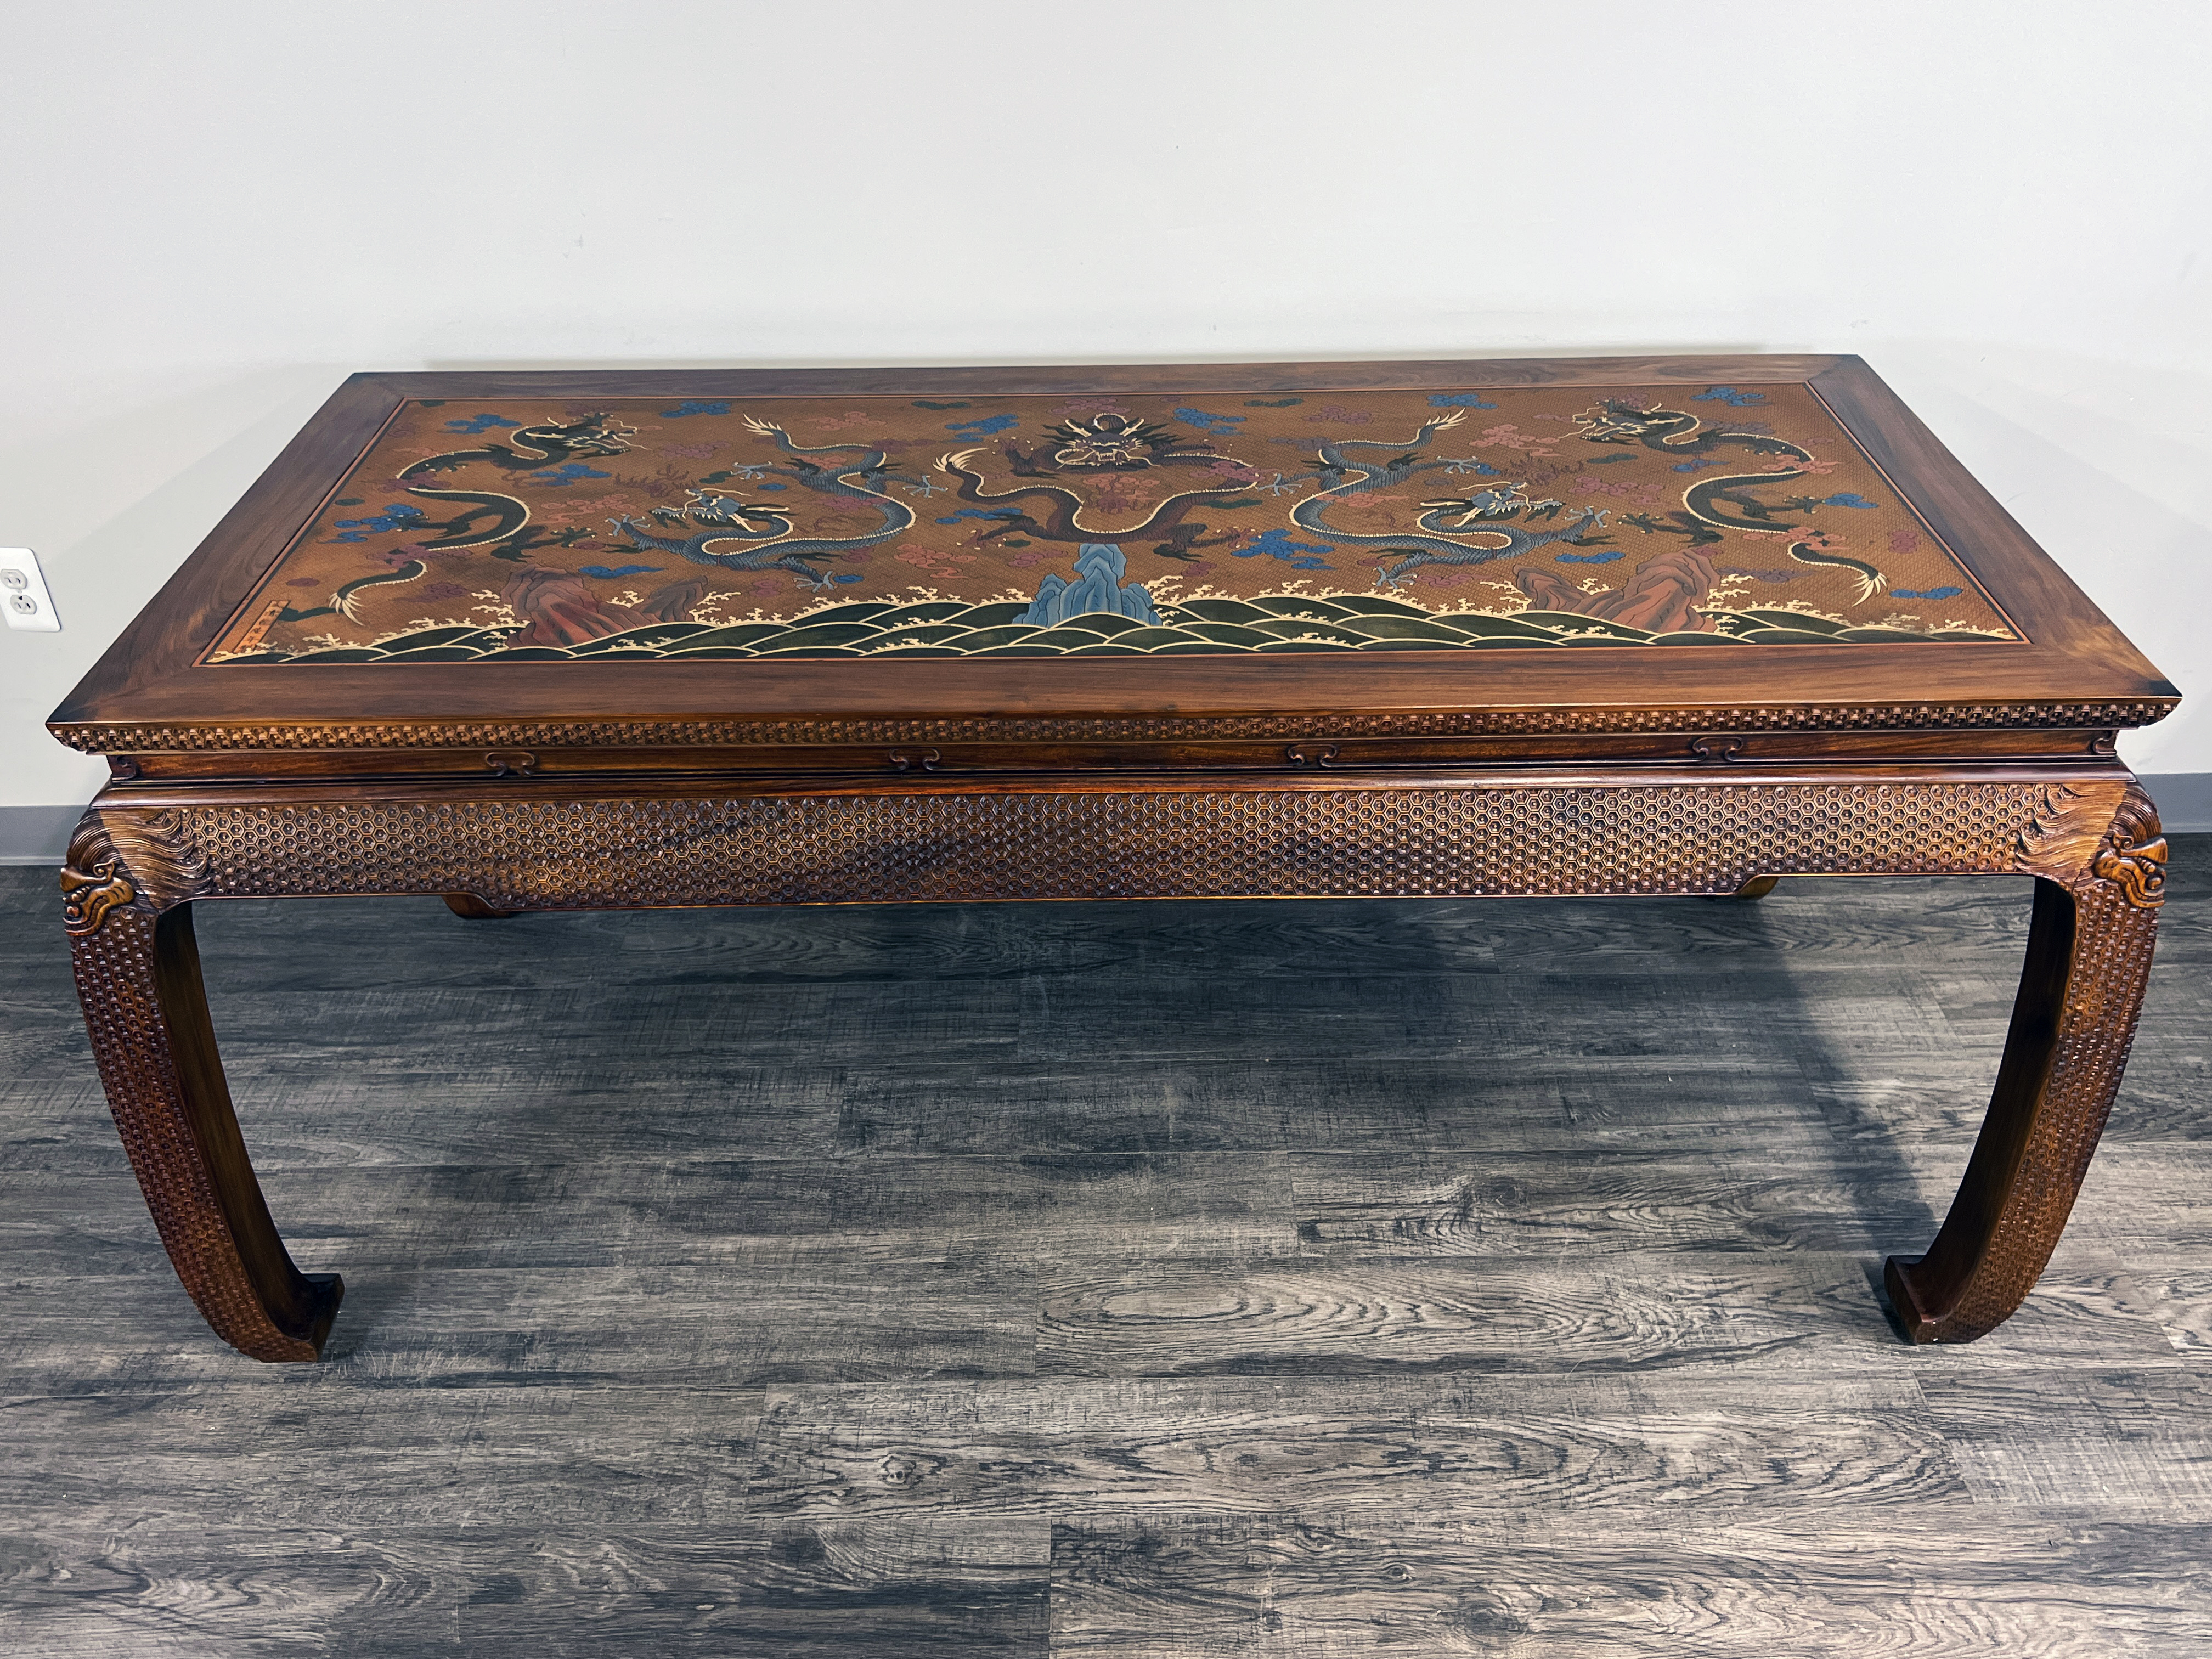 Huanghuali & Lacquer Dragon Motif Table image 1